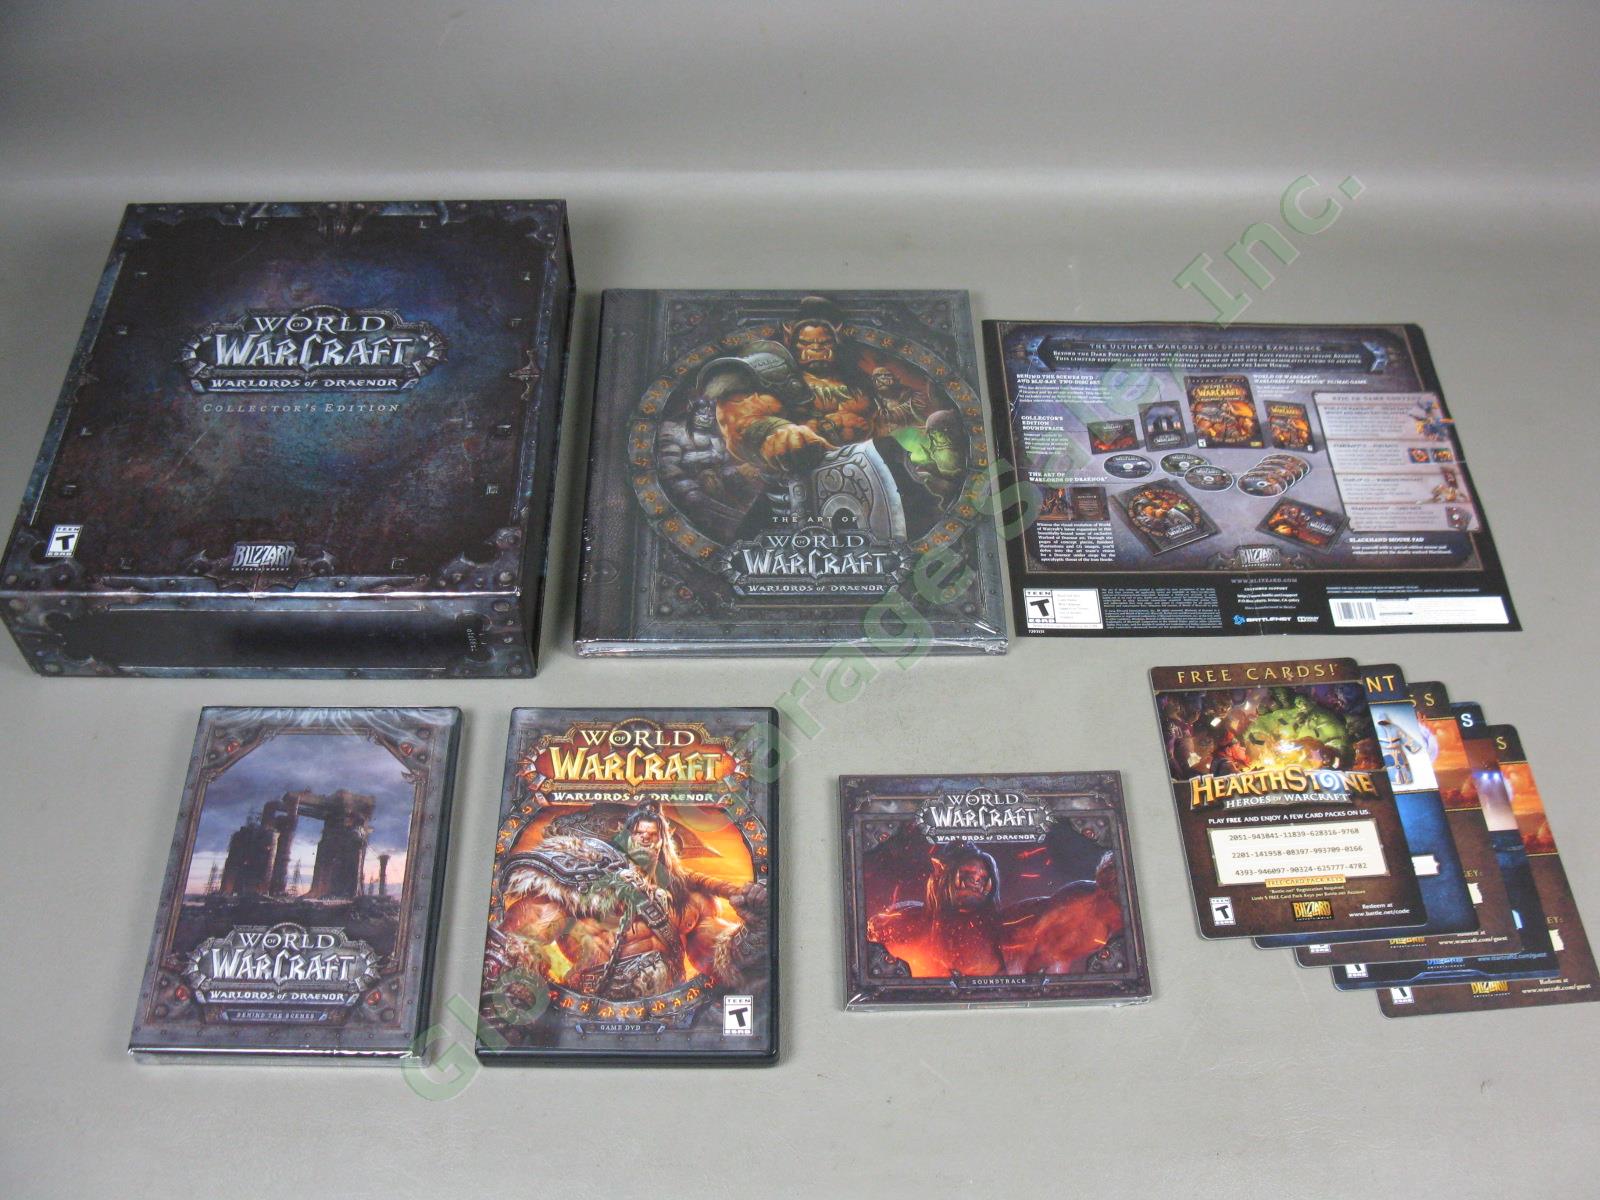 World Of Warcraft Warlords Of Draenor Collectors Edition Sealed Book CD DVD NR!